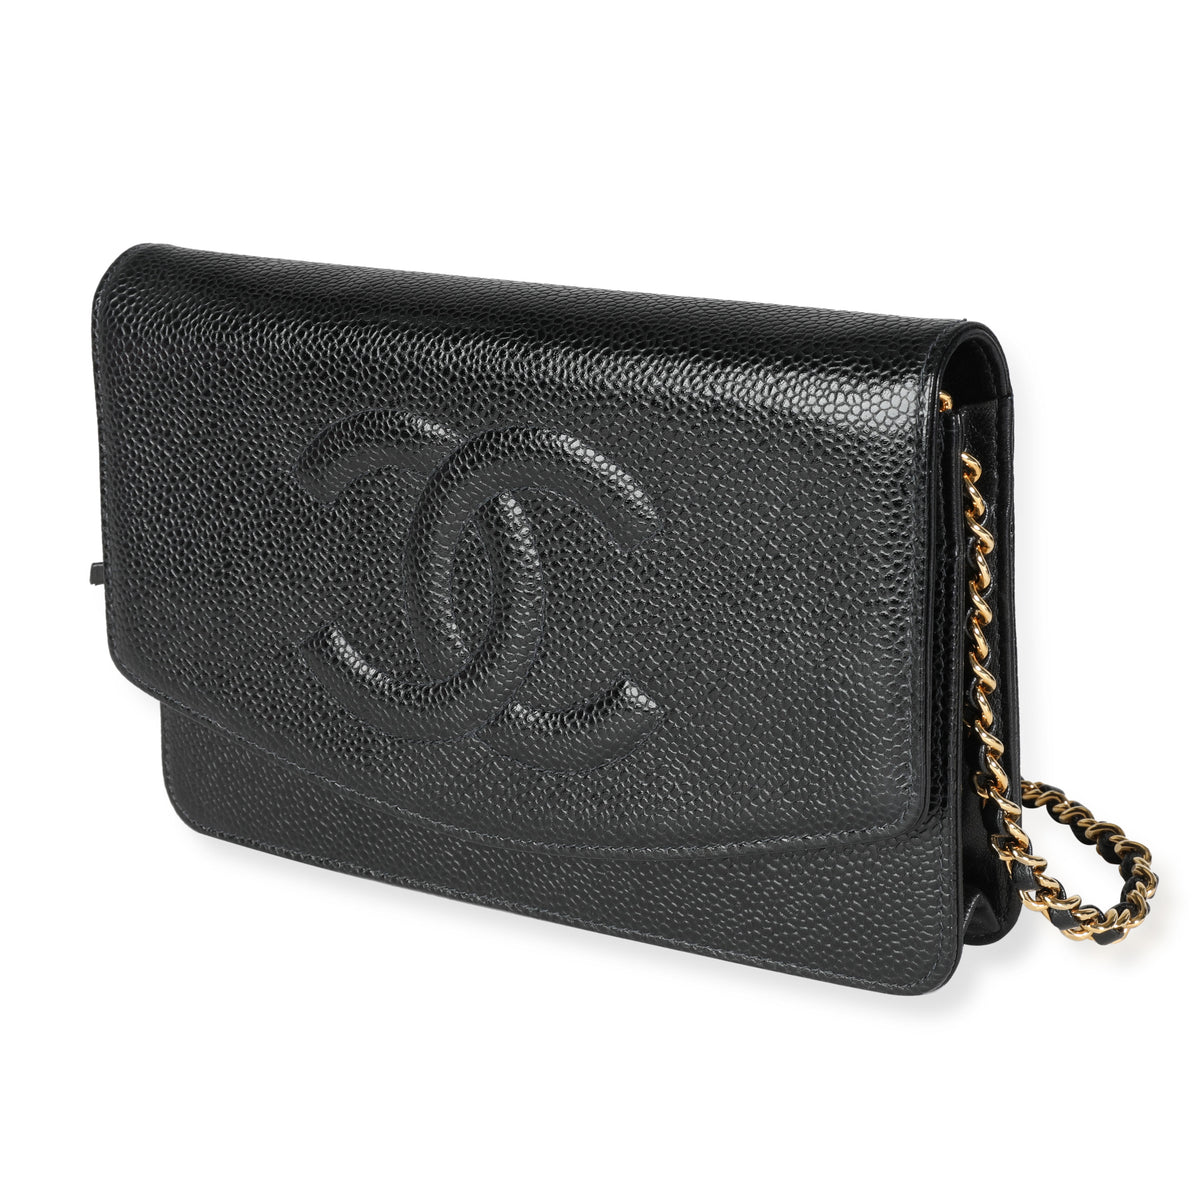 CHANEL White Caviar Leather Timeless Wallet on Chain - The Purse